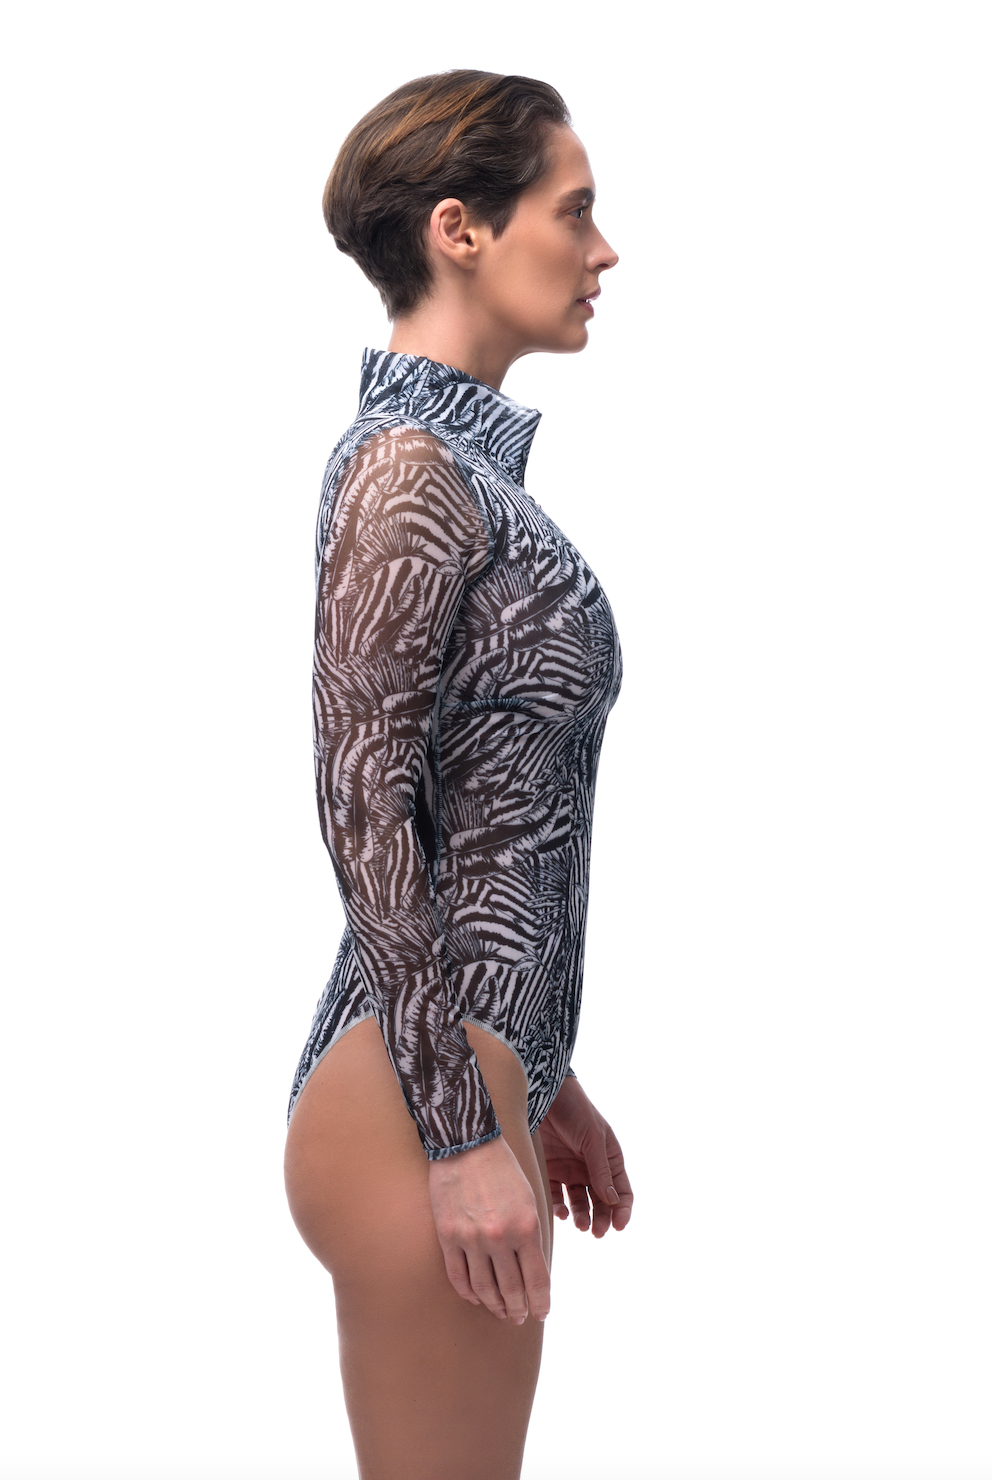 Explore sustainable tan-through smart swimsuits adorned with a trendy Fake Zebra print in this file. Featuring a zipper design with sleeves, they offer both style and sun protection.